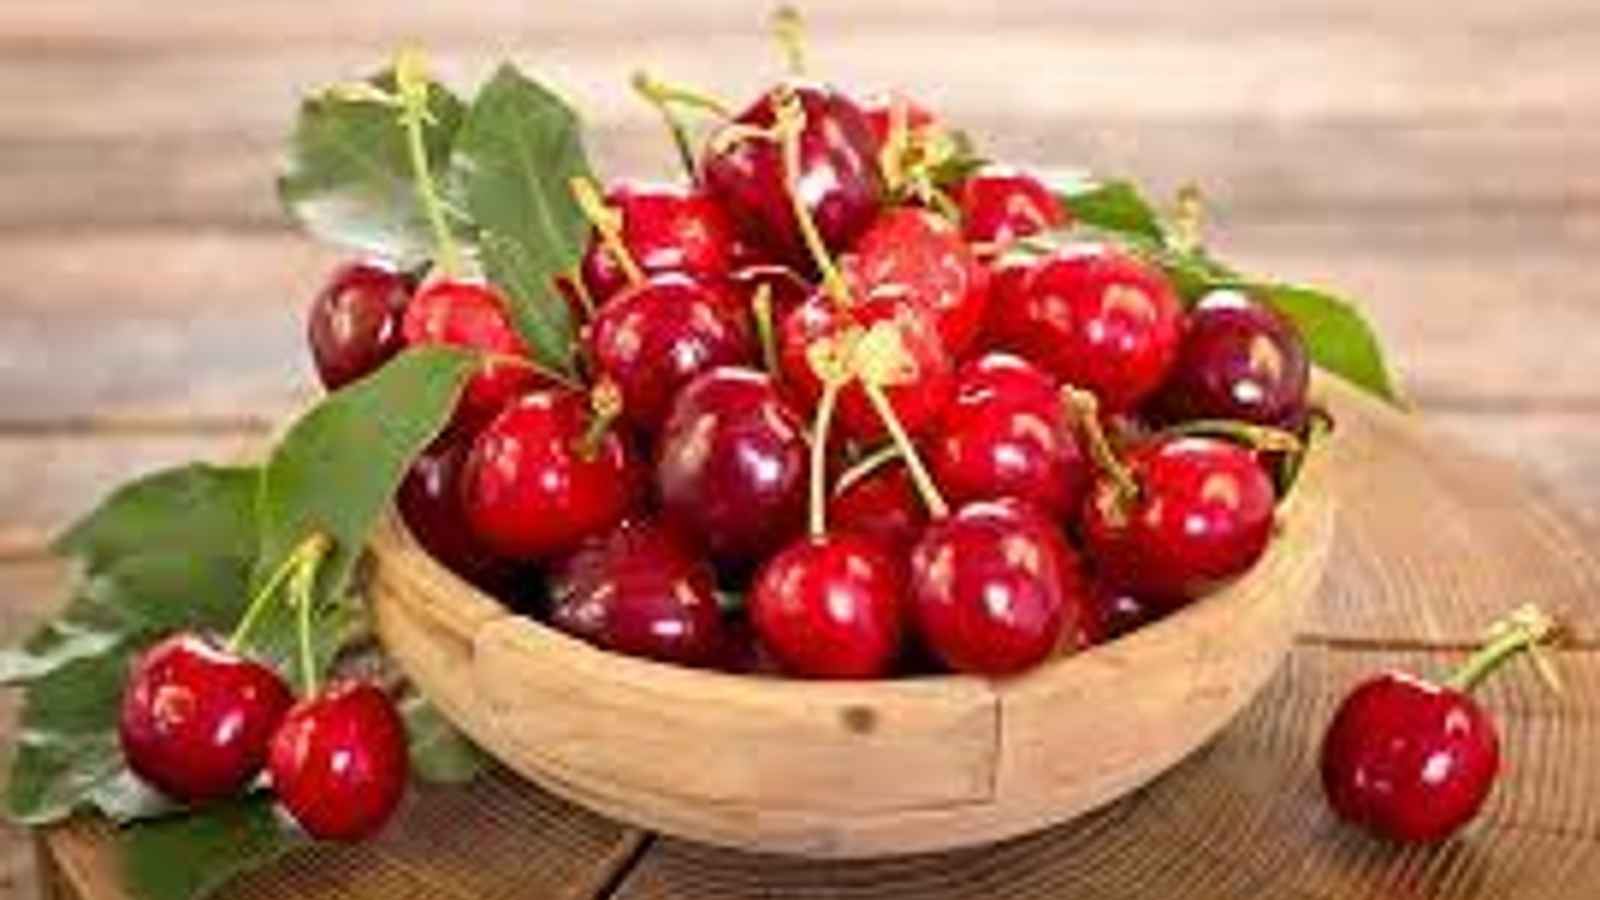 National Cherry Day 2023: Date, History, Facts, Activities